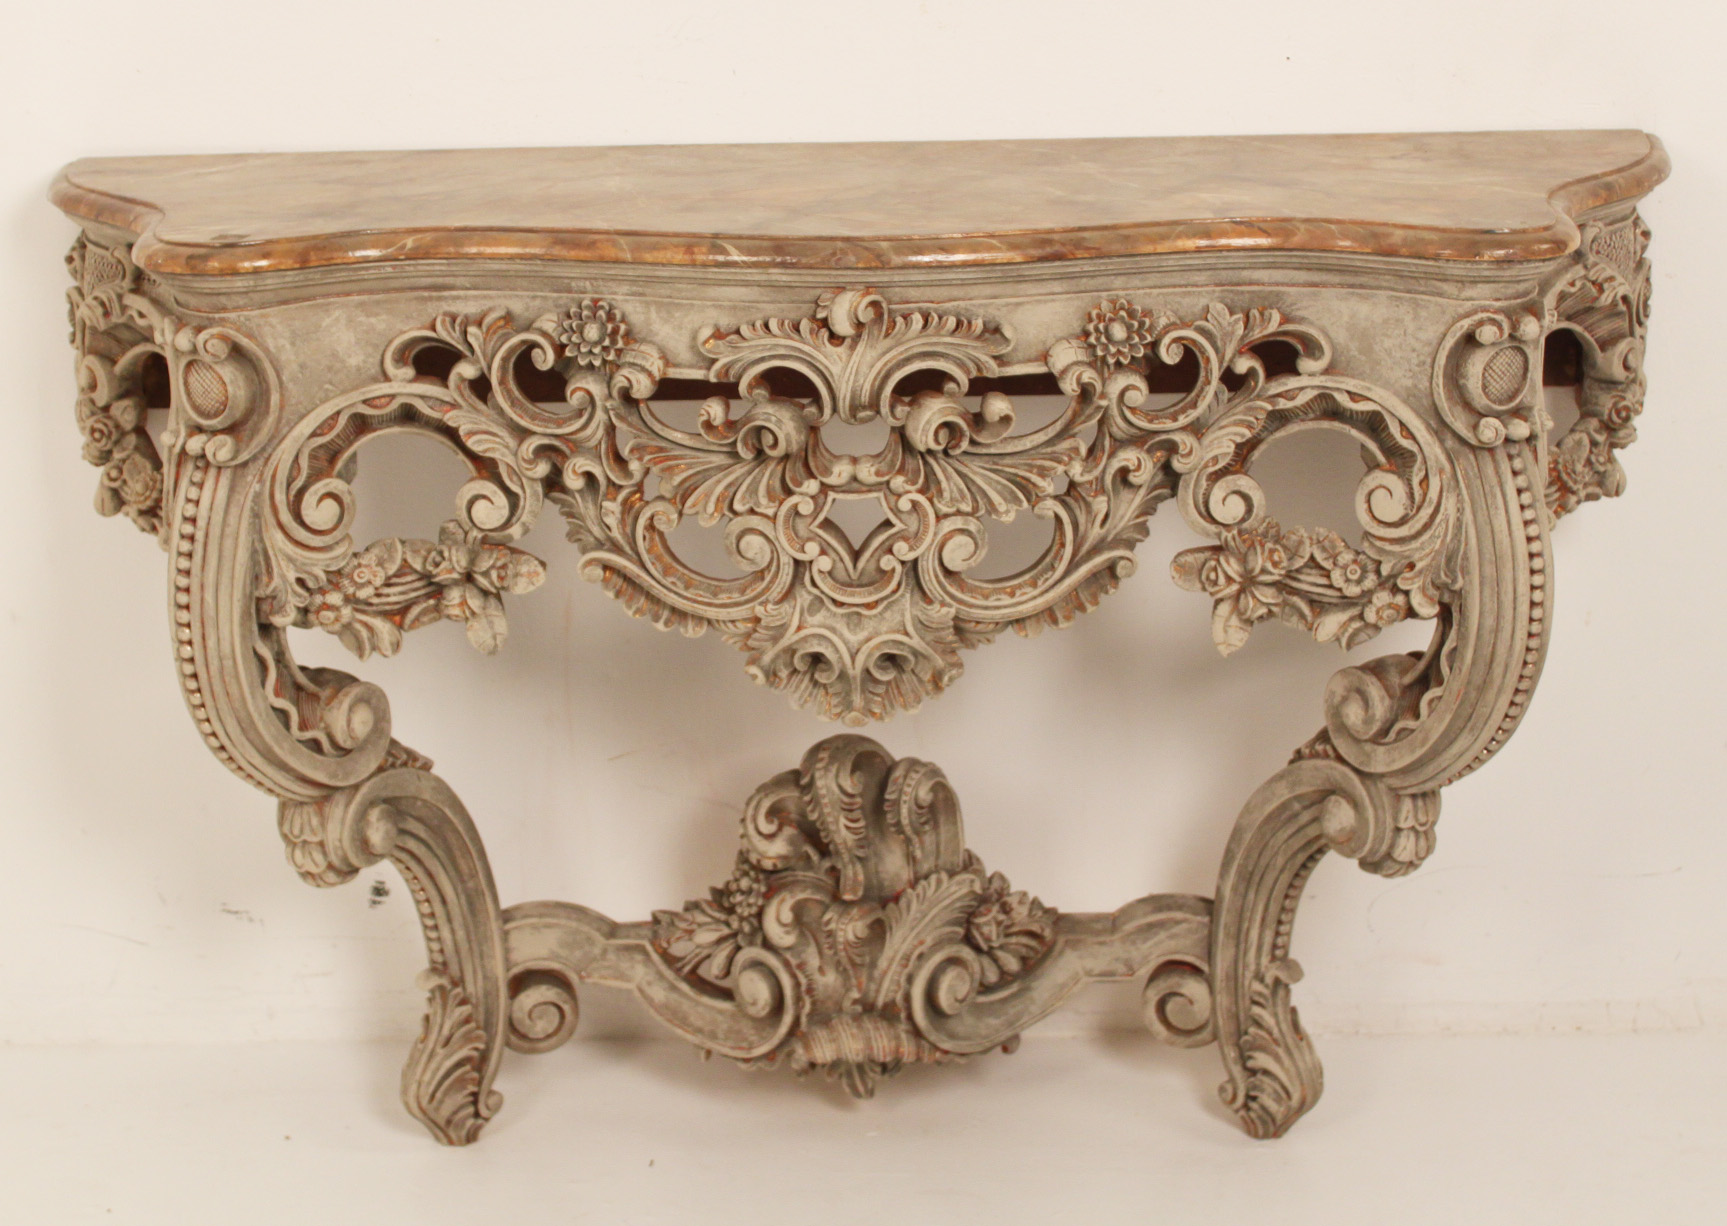 LOUIS XV PAINTED AND GILT CONSOLE 2c89e3